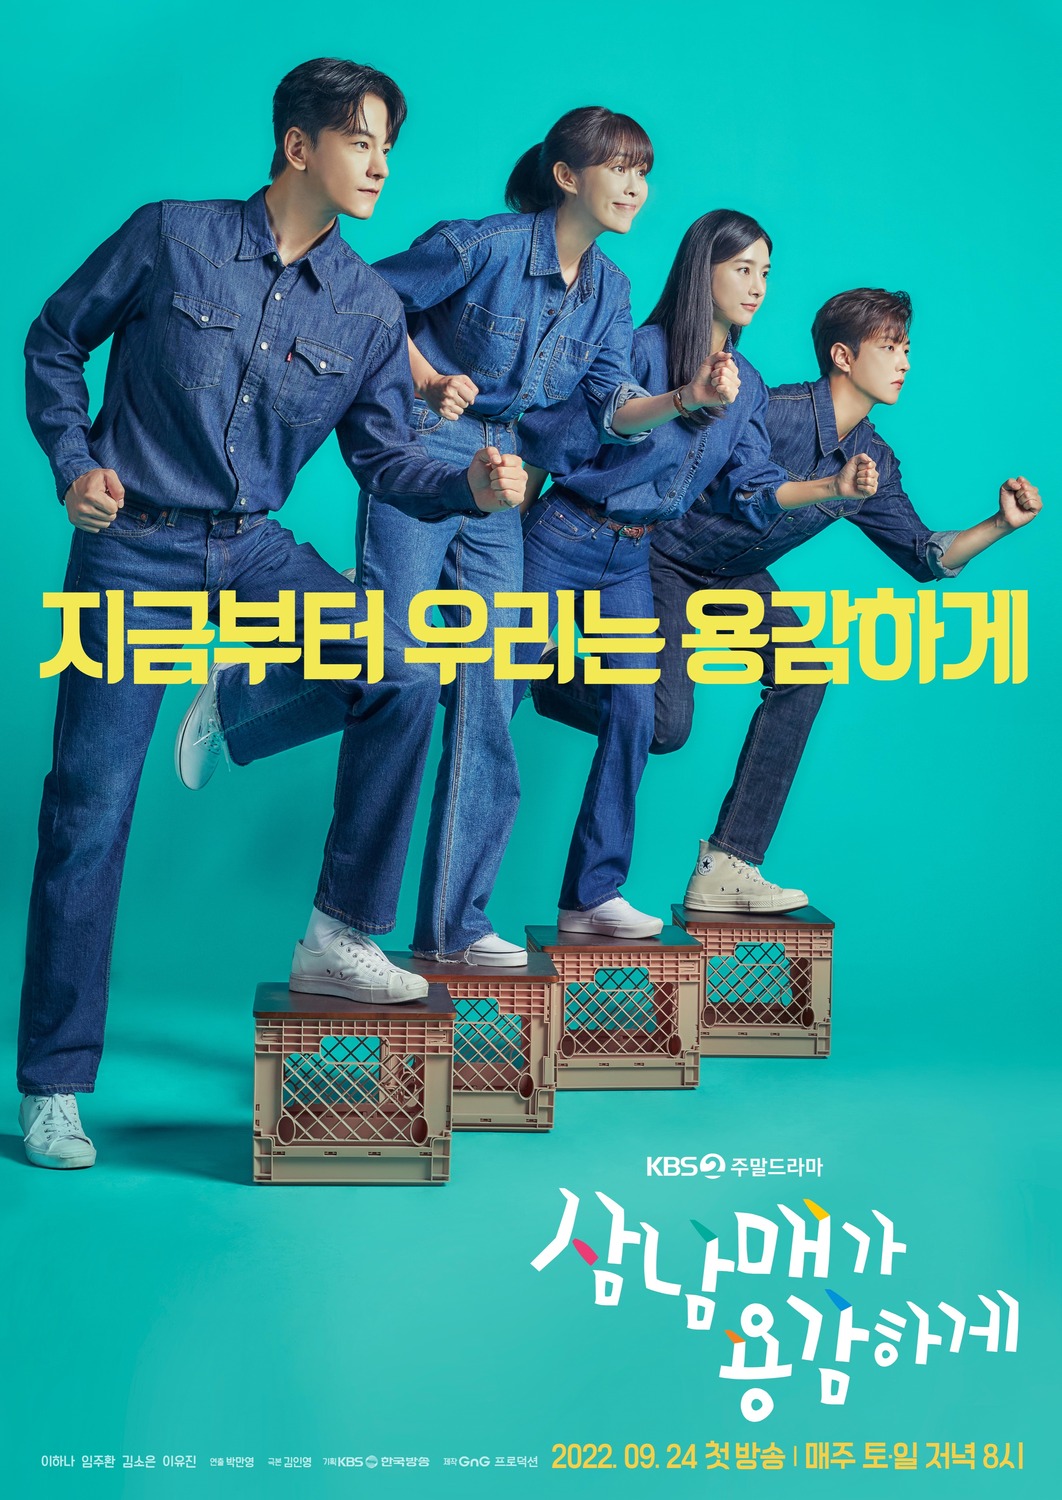 Extra Large TV Poster Image for Three Bold Siblings 